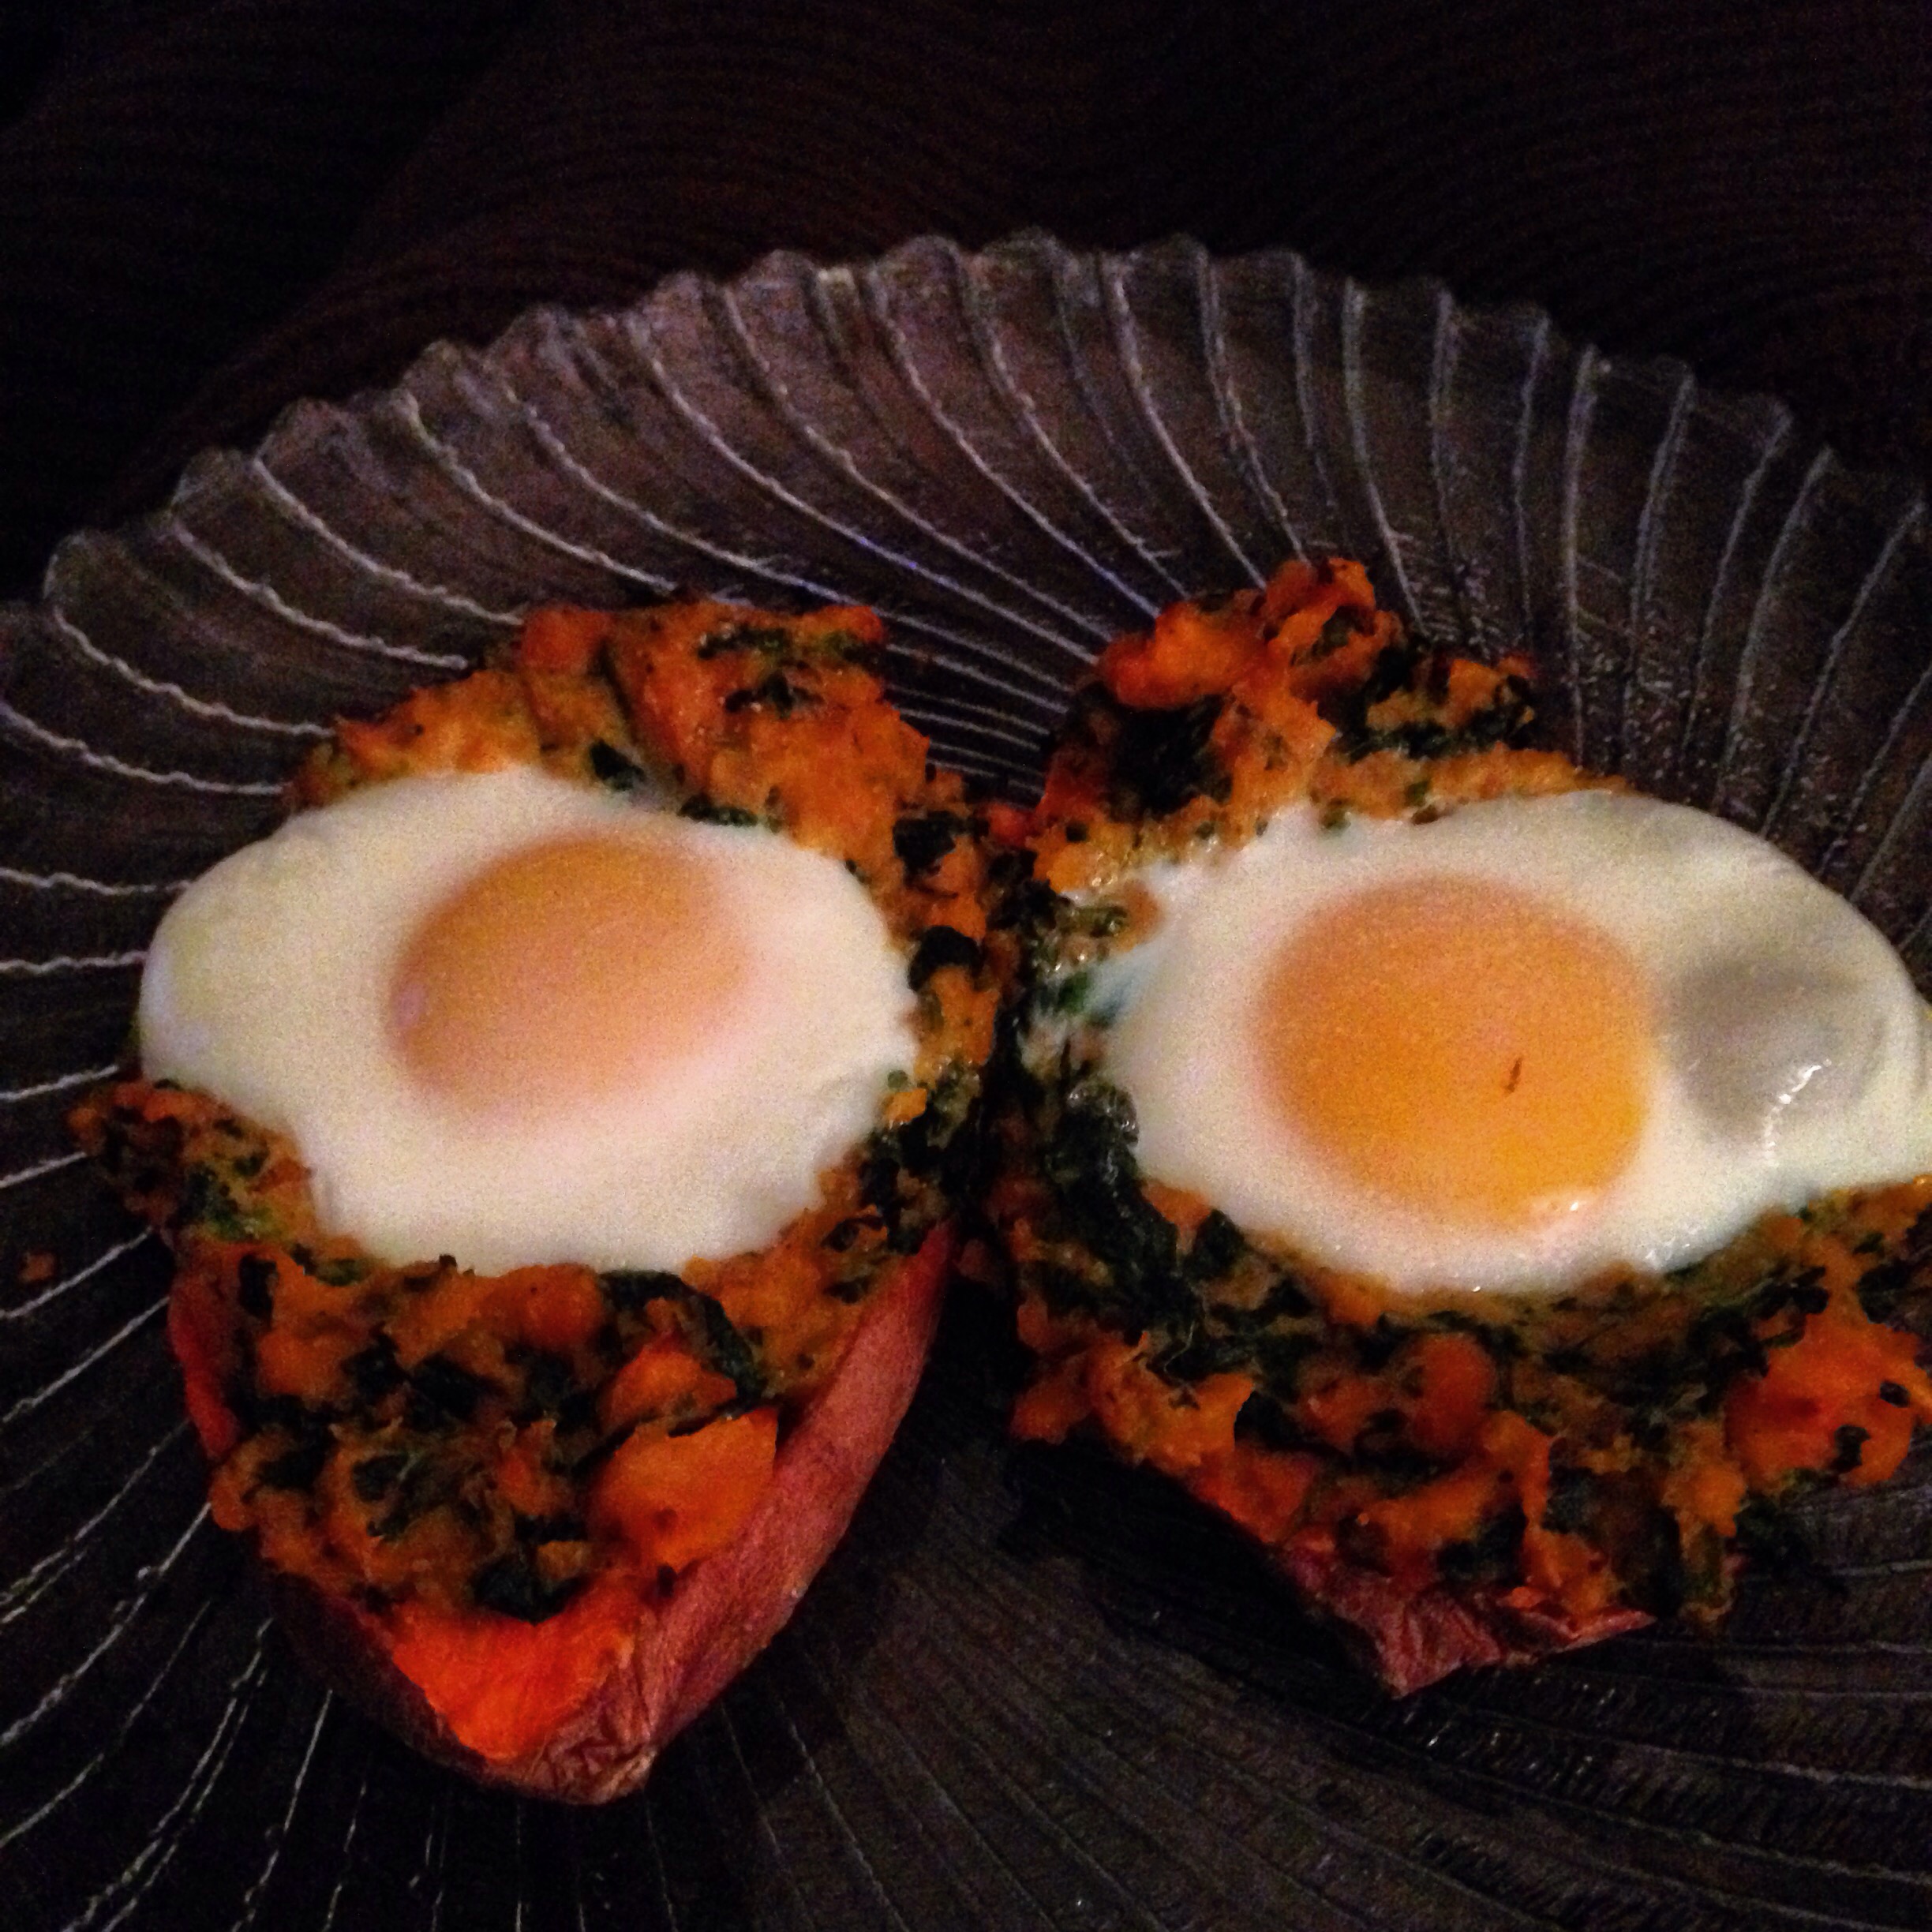 Twice-baked spinach-stuffed sweet potatoes with eggs